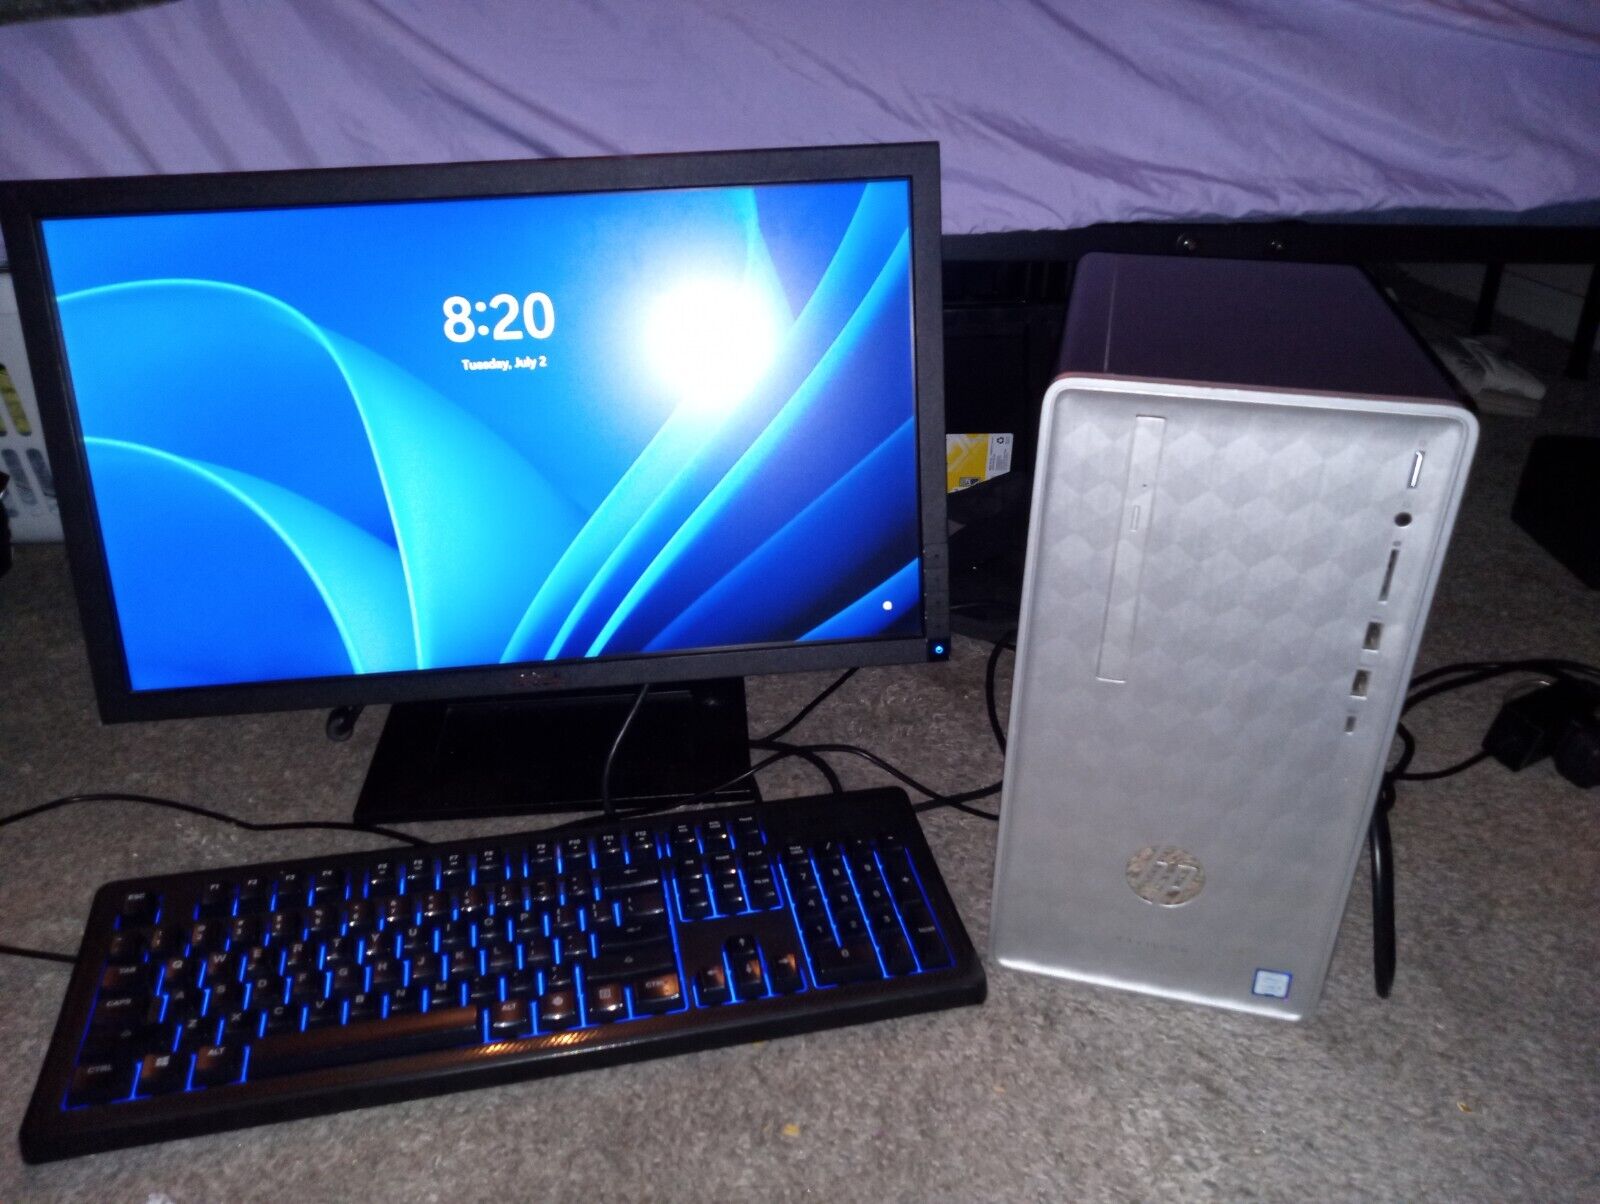 HP Pavilion Desktop Tower, Dell Monitor, Mouse, Keyboard-Excellent Condition